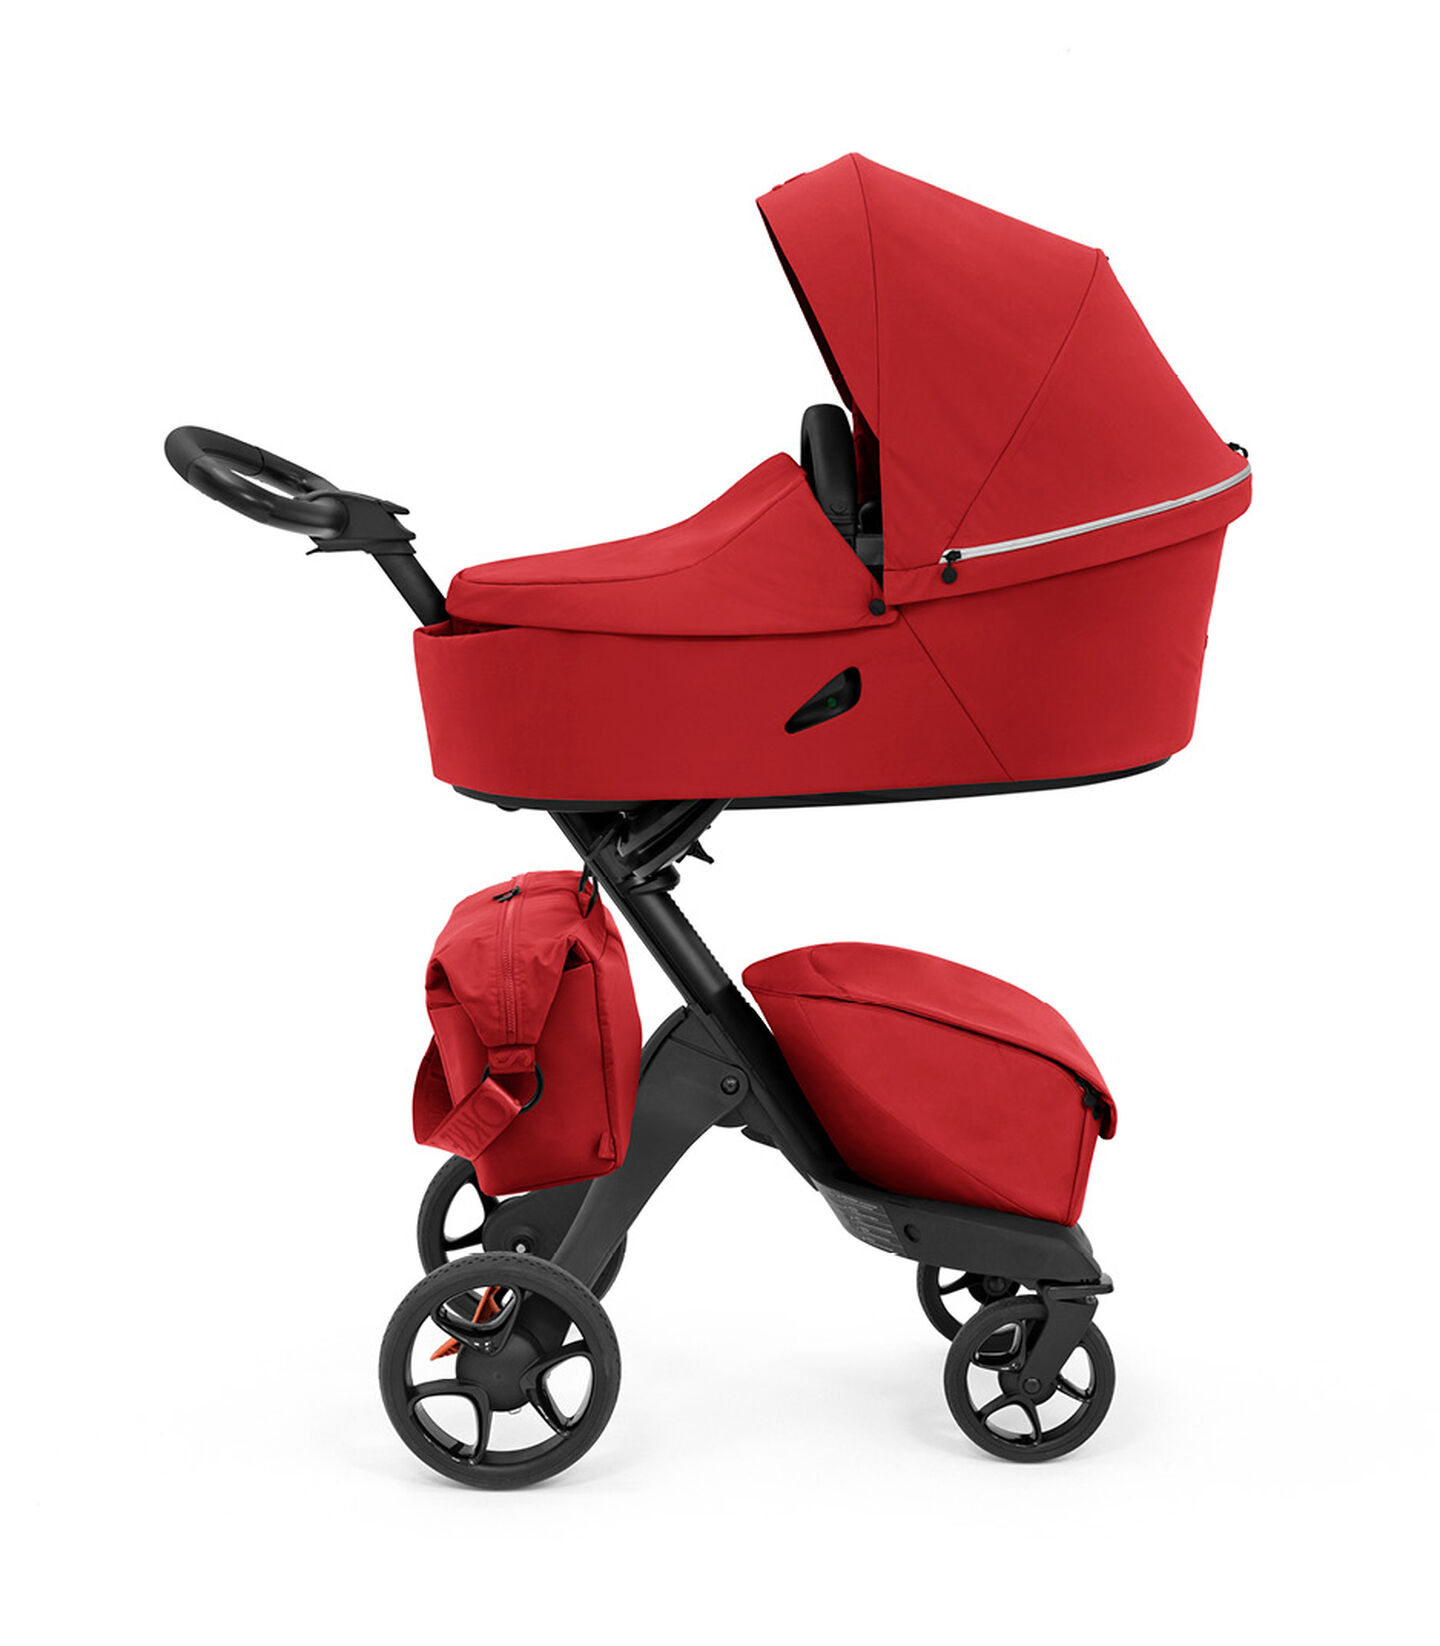 Stokke® Xplory® stelleveske Ruby Red, Ruby Red, mainview view 4